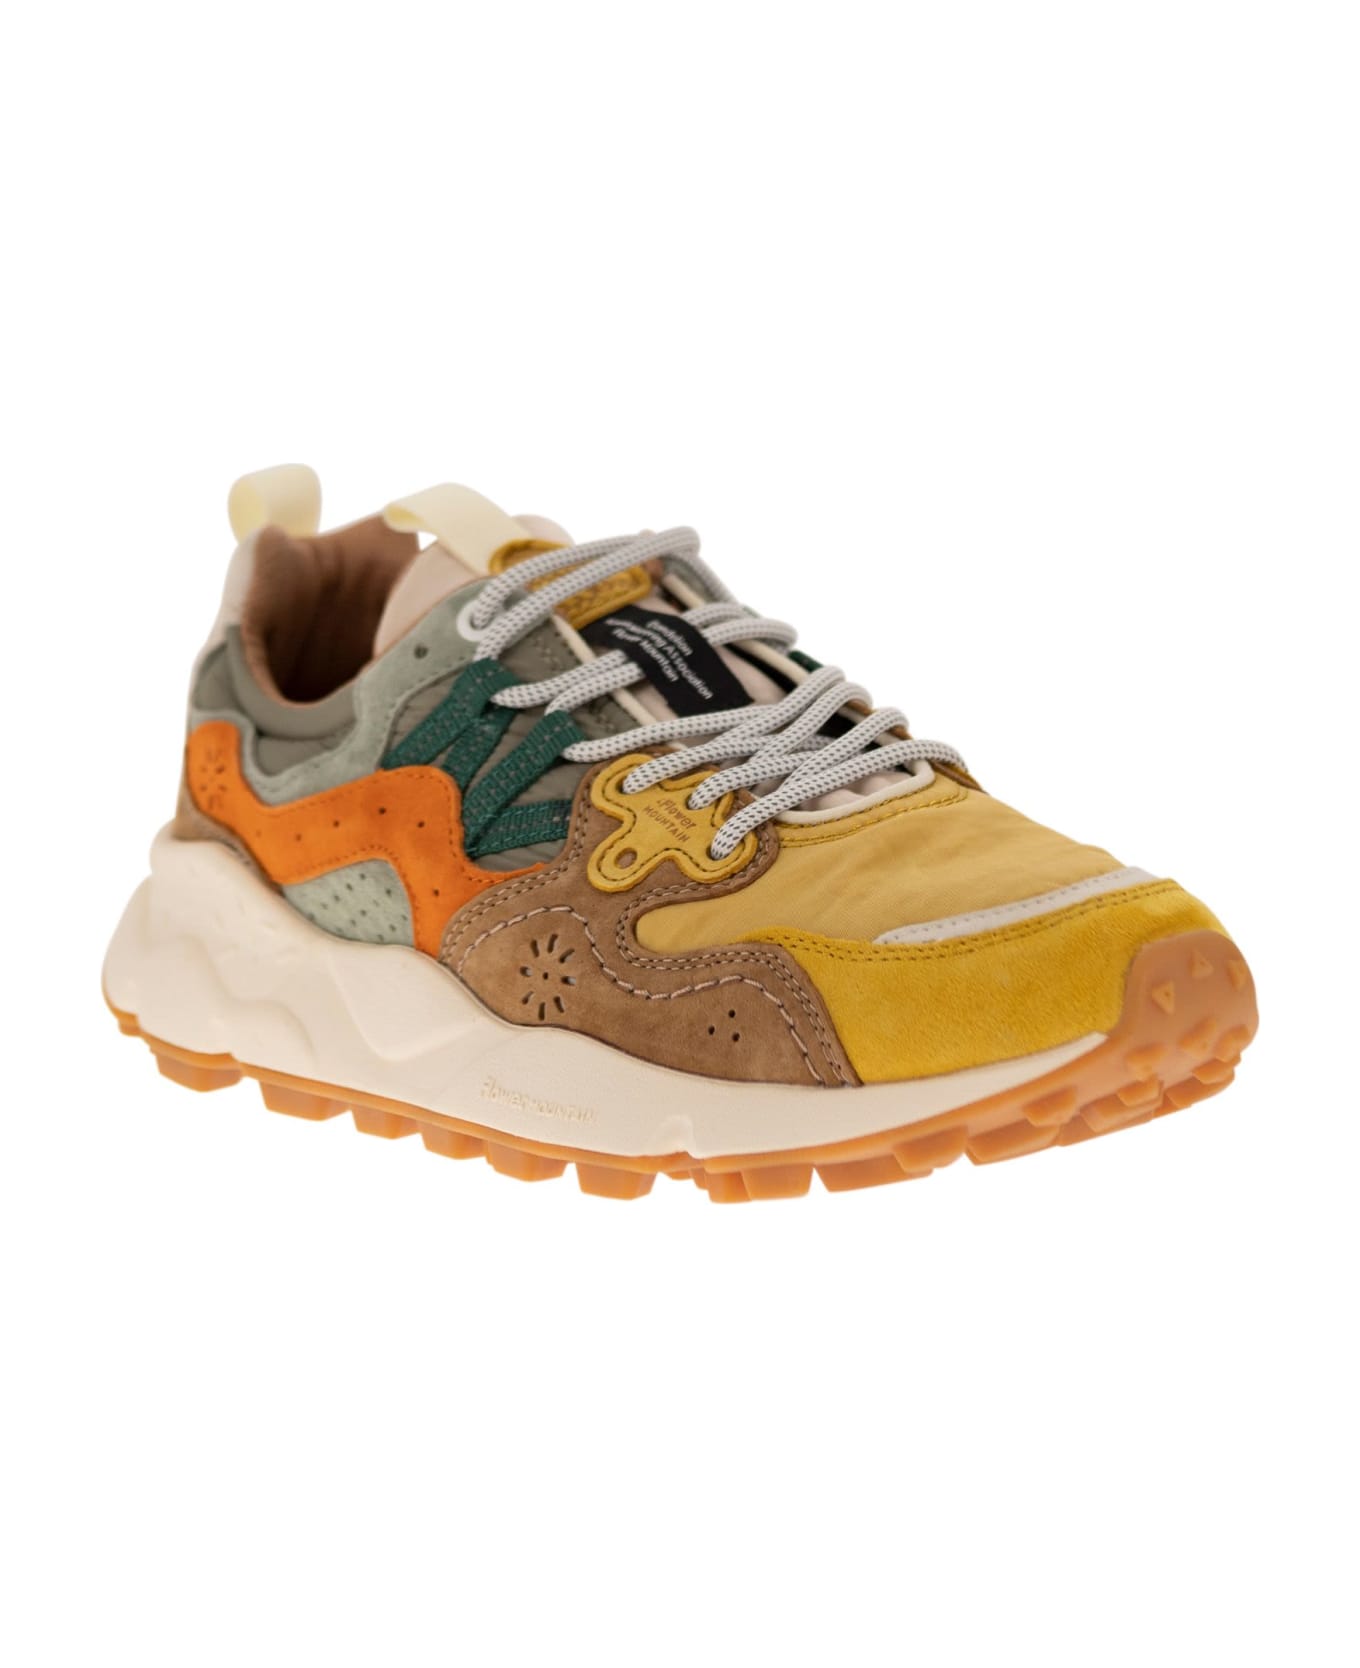 Flower Mountain Yamano 3 - Sneakers In Suede And Technical Fabric - Orange/military スニーカー